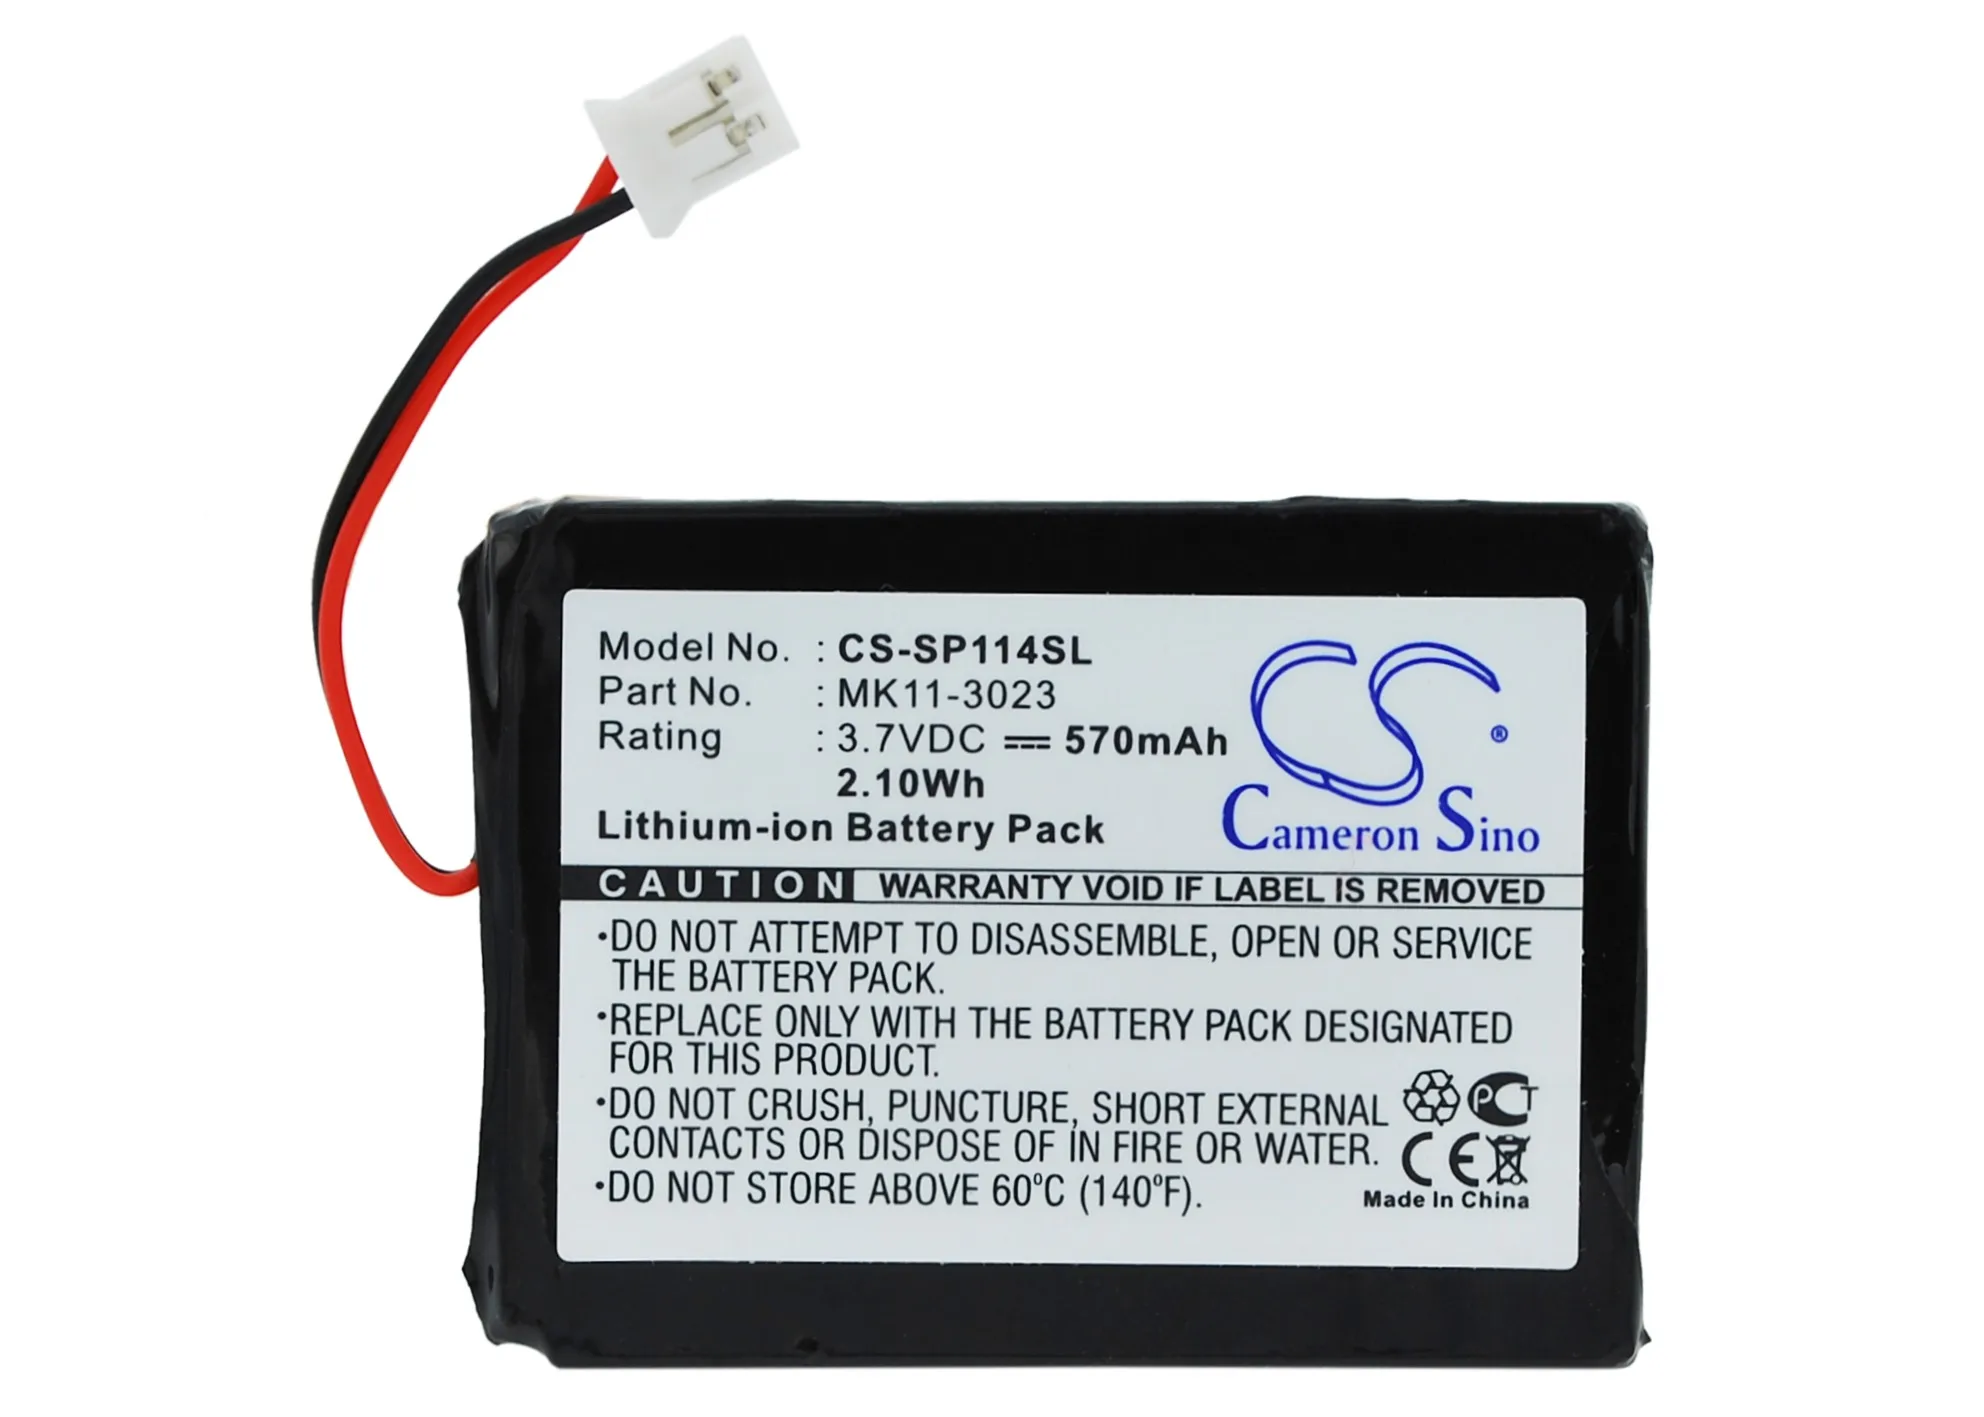 570mAh MK11-2903 MK11-2902 MK11-3023 Battery for Sony CECHZK1UC PlayStation 3 Wireless Qwerty CECHZK1JP PS3 Wireless Qwerty Keyp